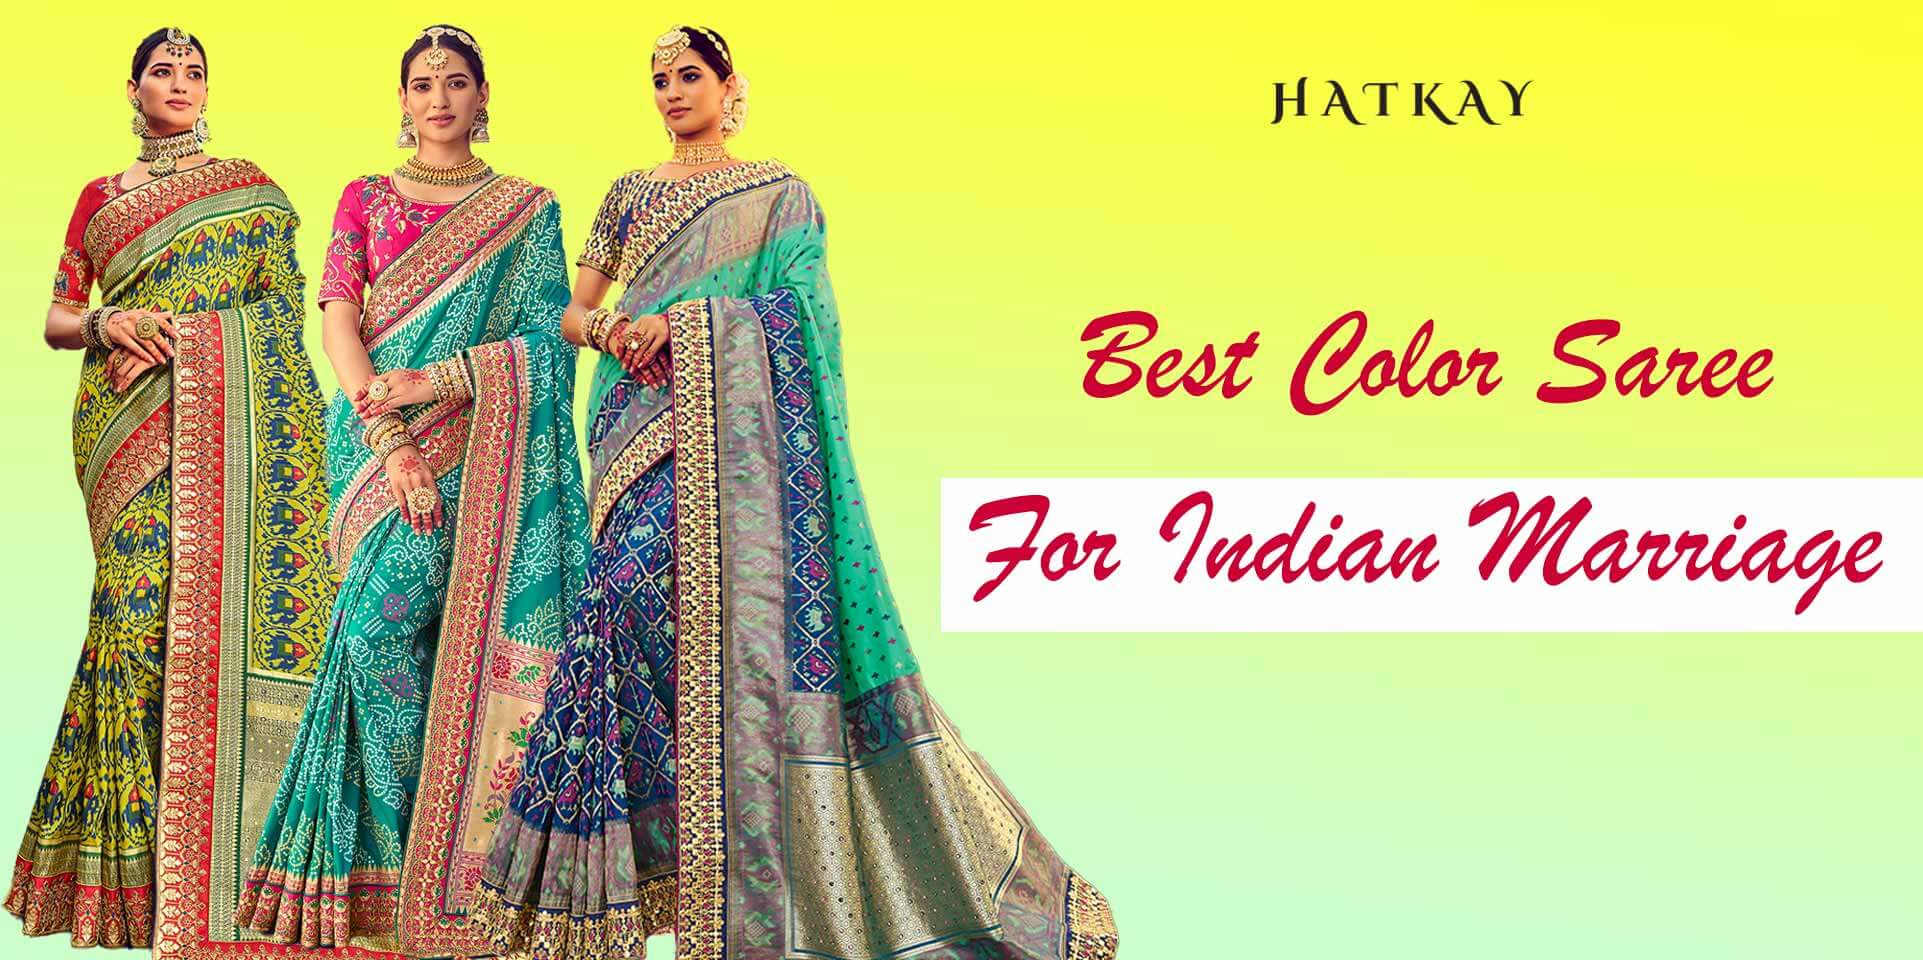 Which Color Saree is Best for Marriage?